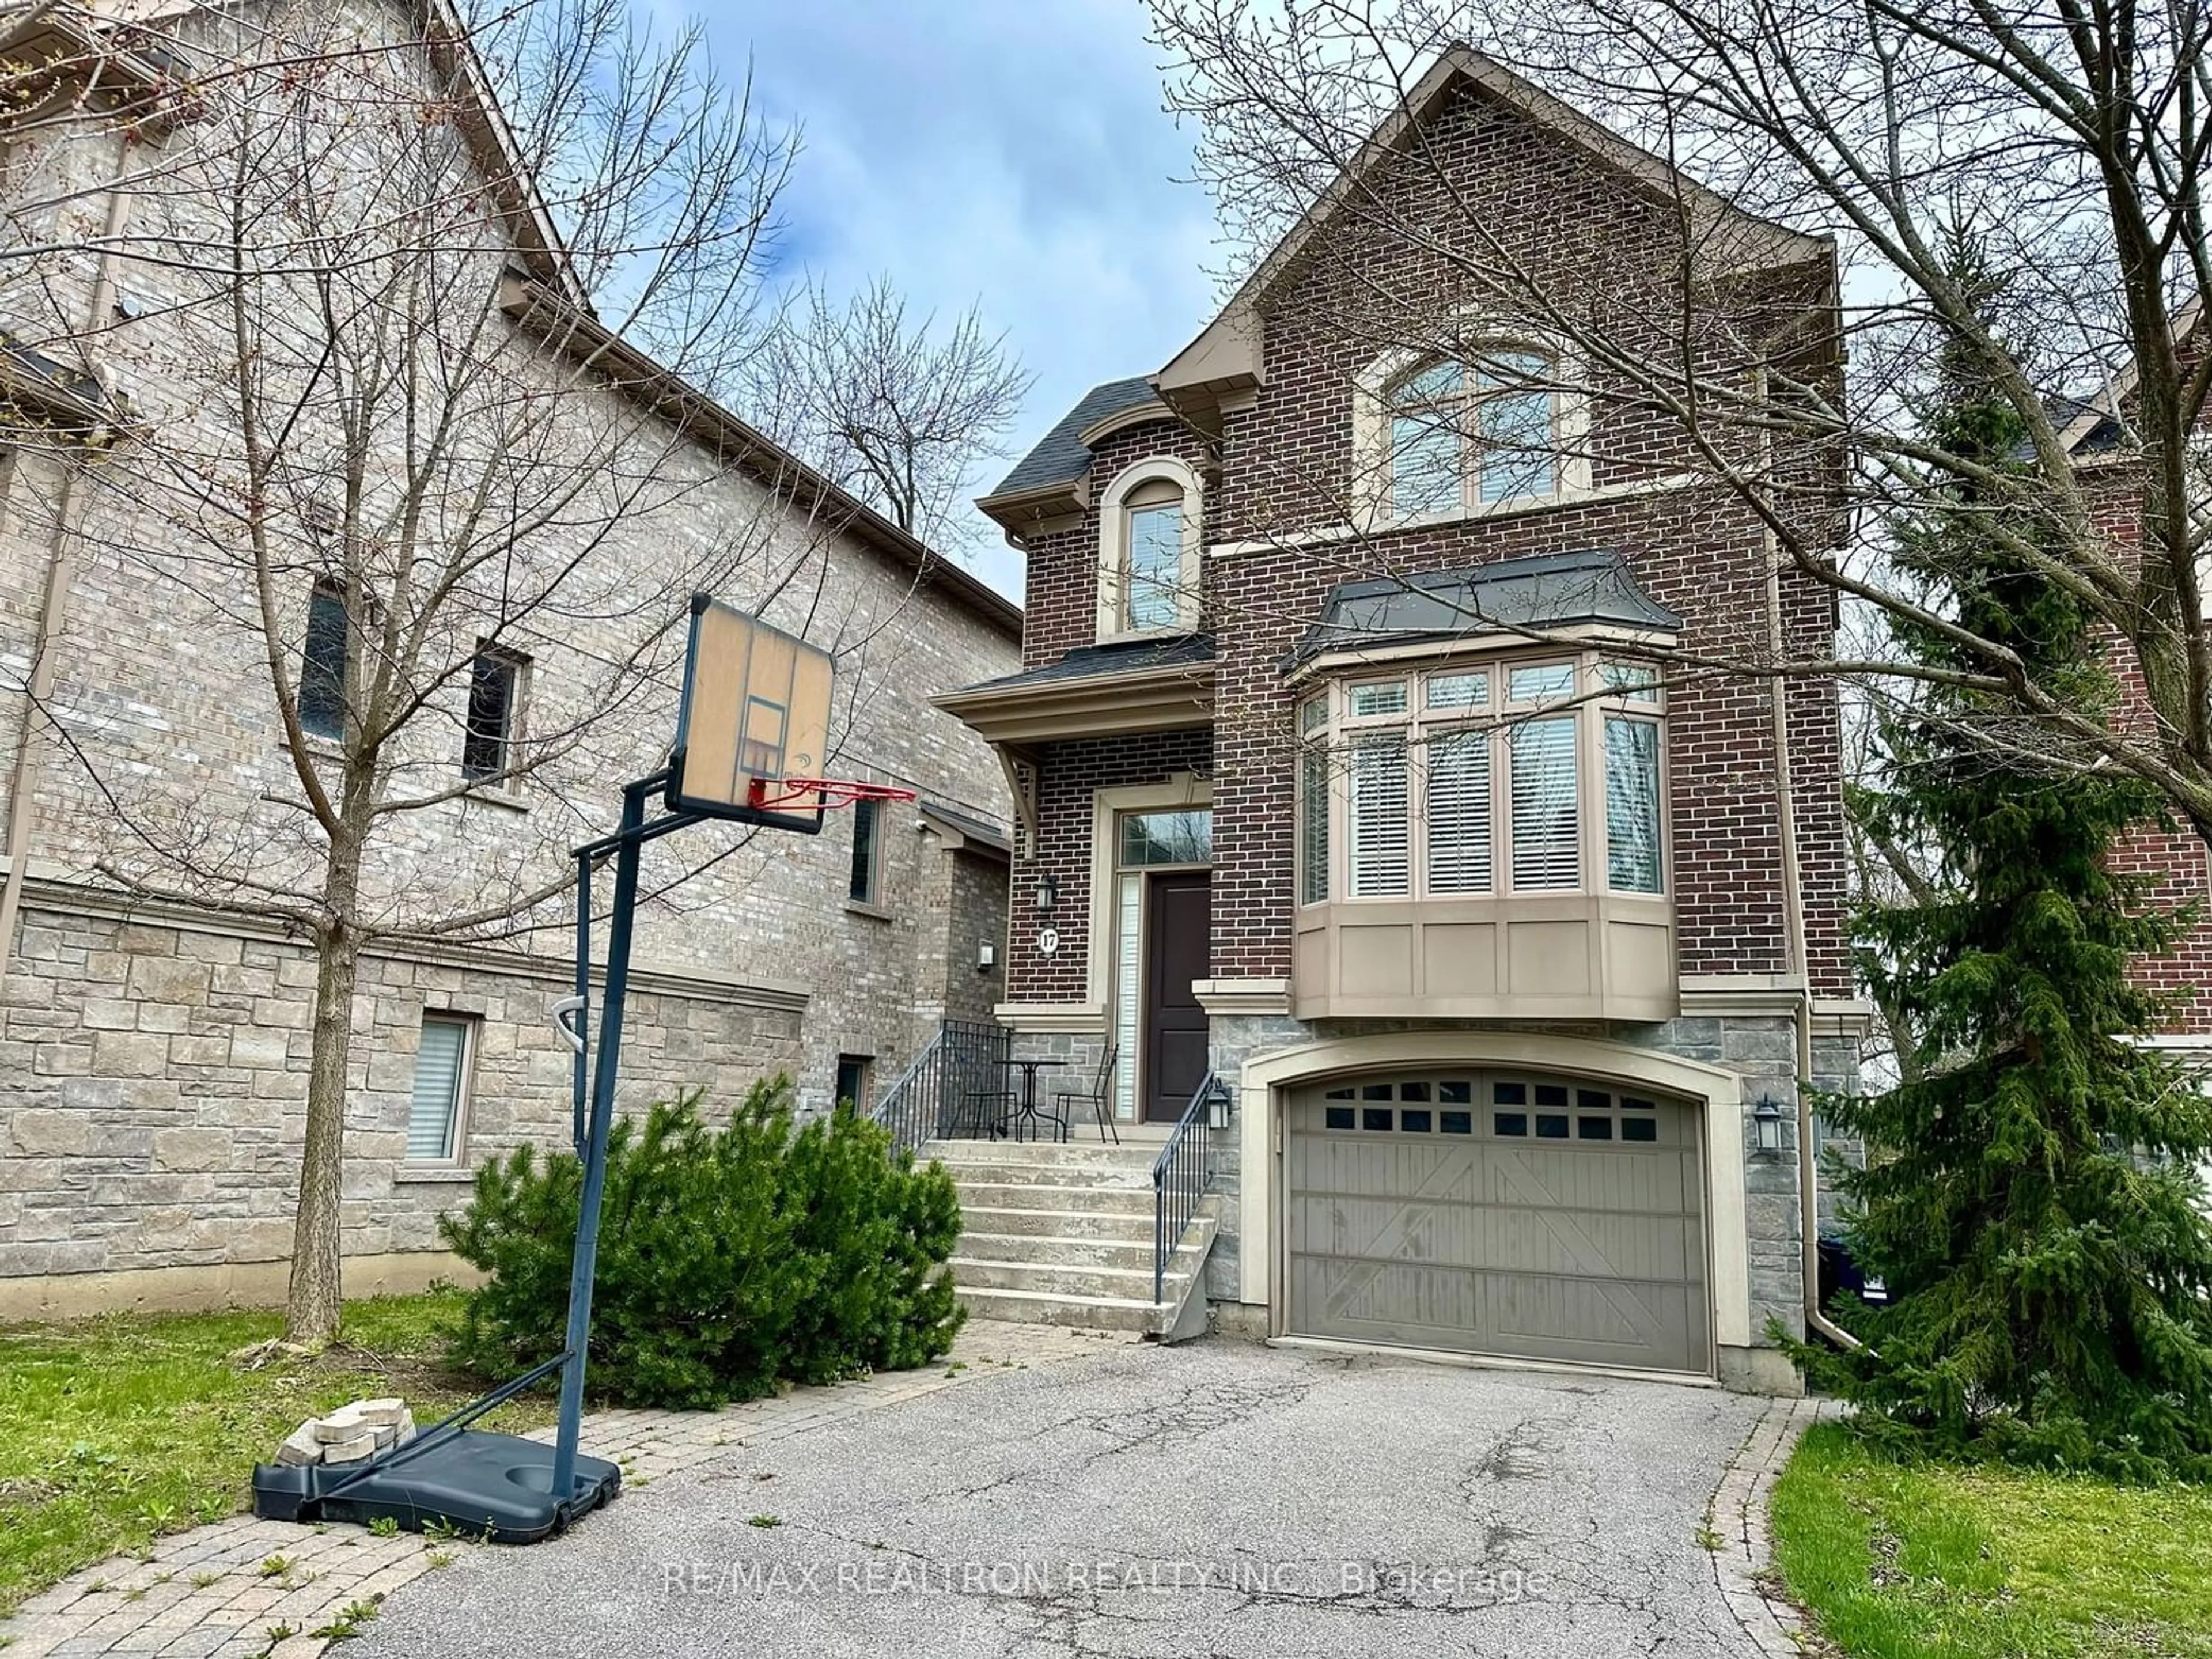 Home with brick exterior material for 17 Leona Dr, Toronto Ontario M2N 4V3